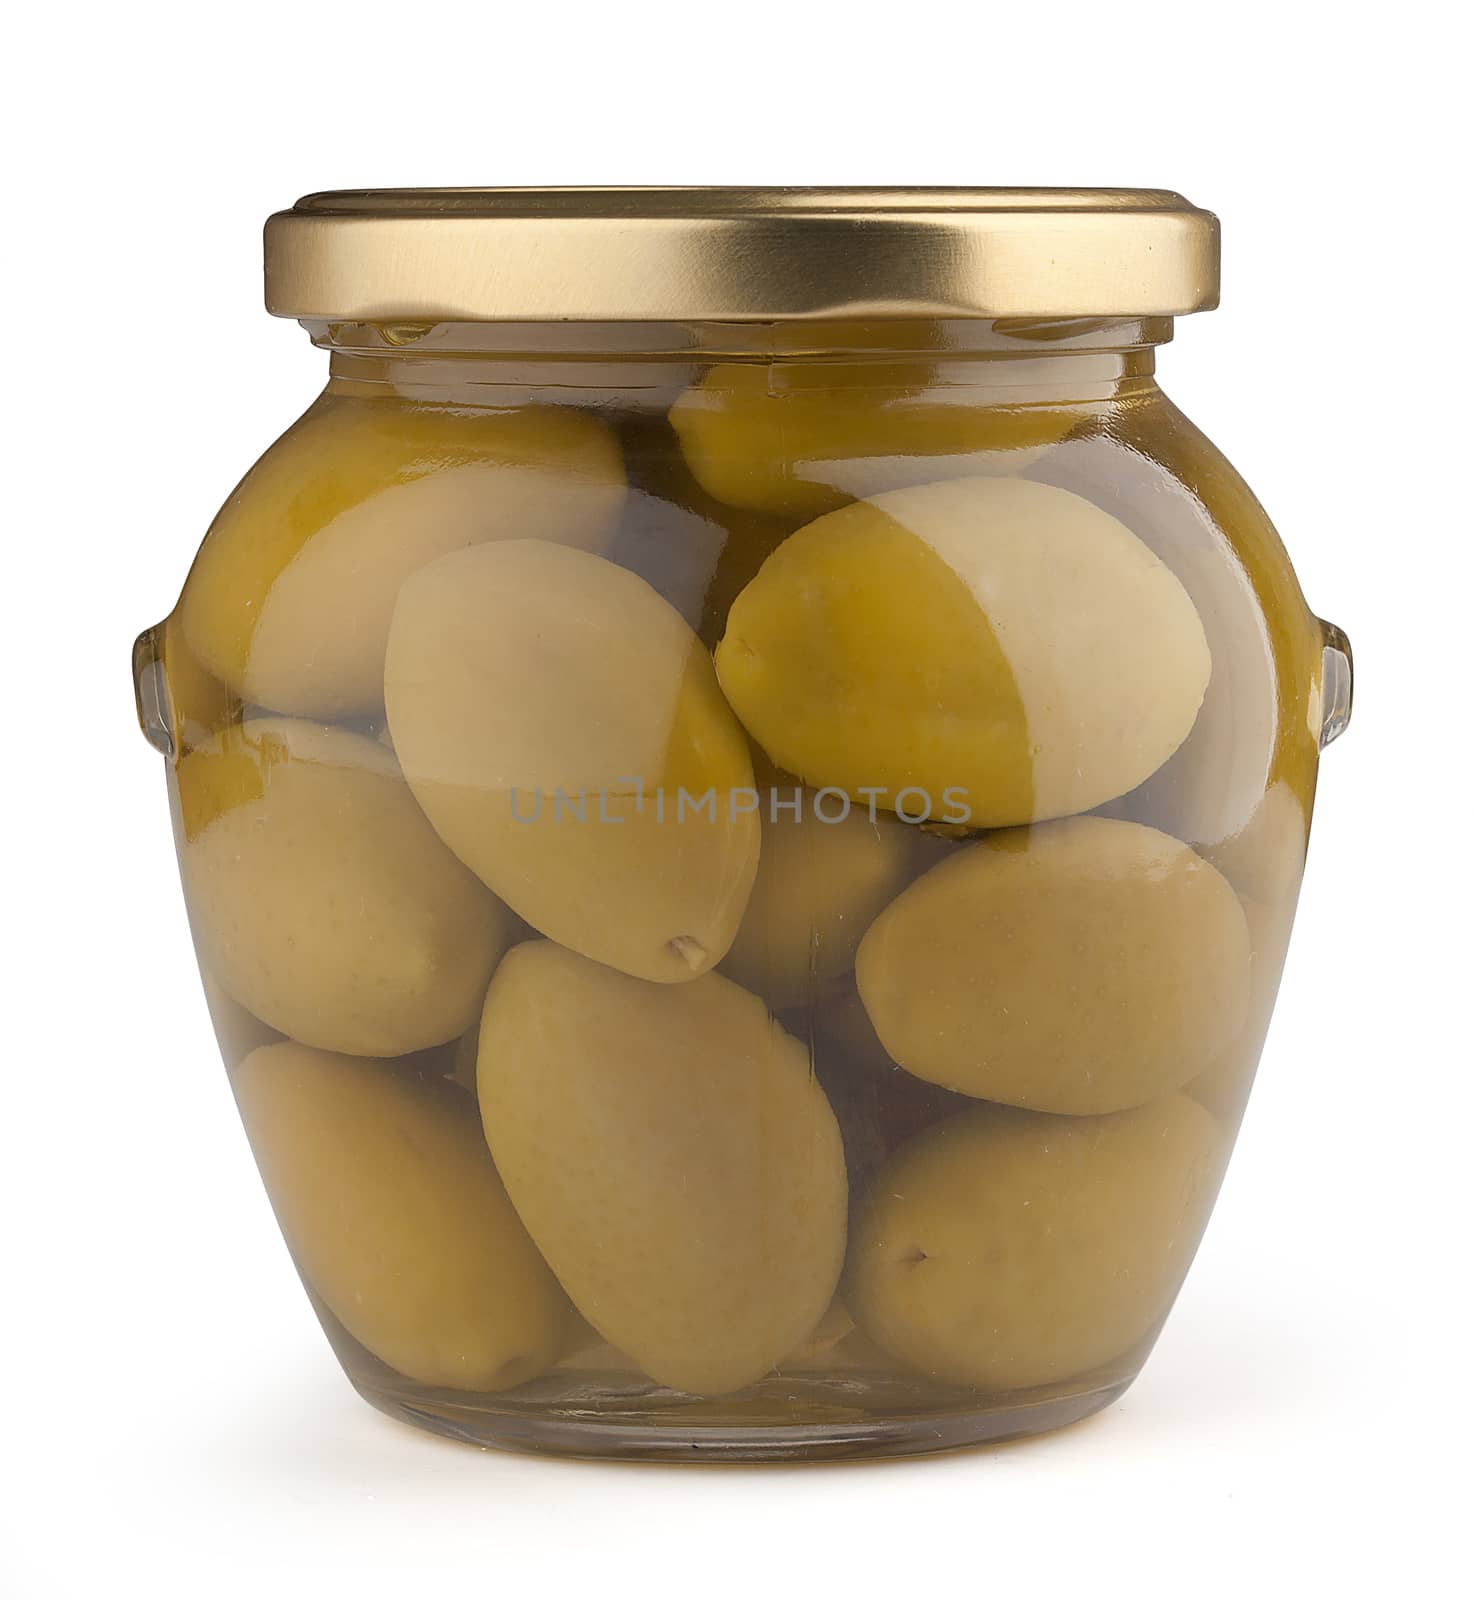 Marinated giant olives in a glass jar on the white